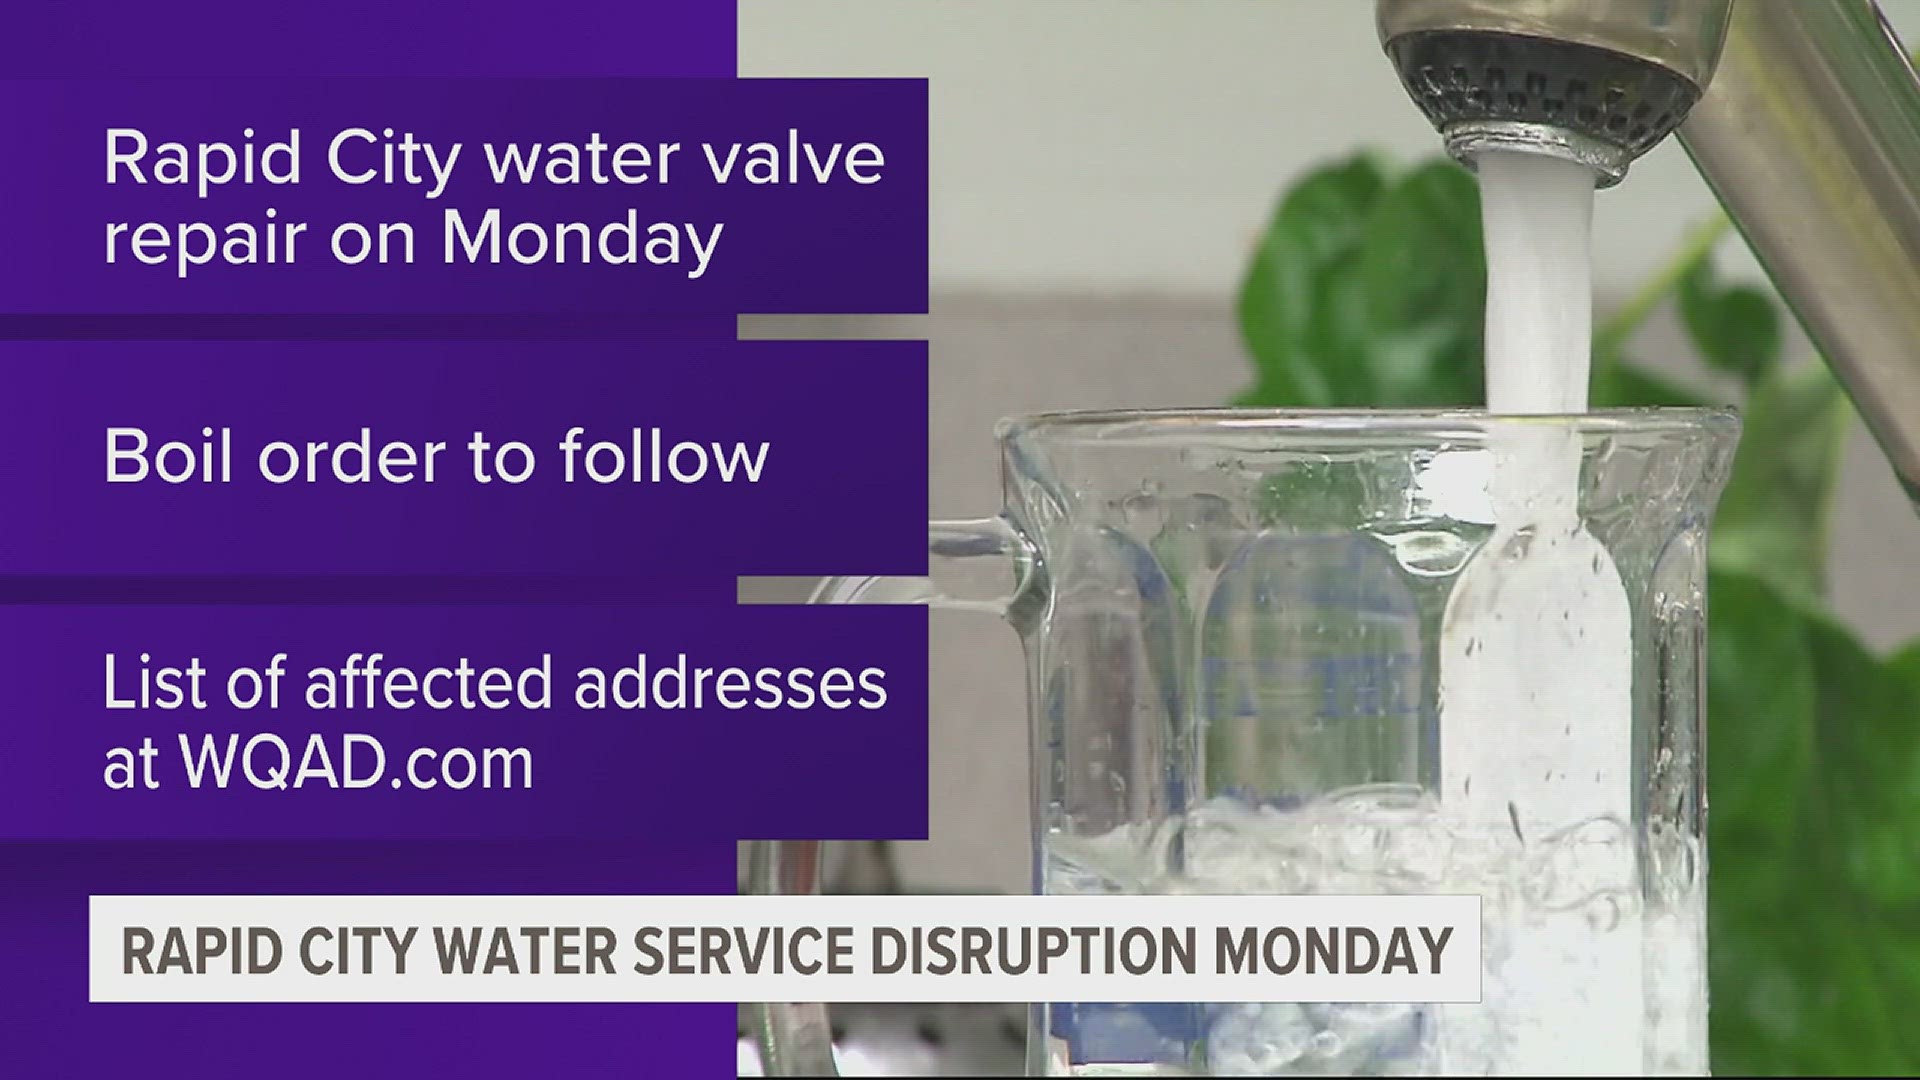 Rapids City will be replacing a water valve Monday. Once services are restored, a boil order will go into effect.